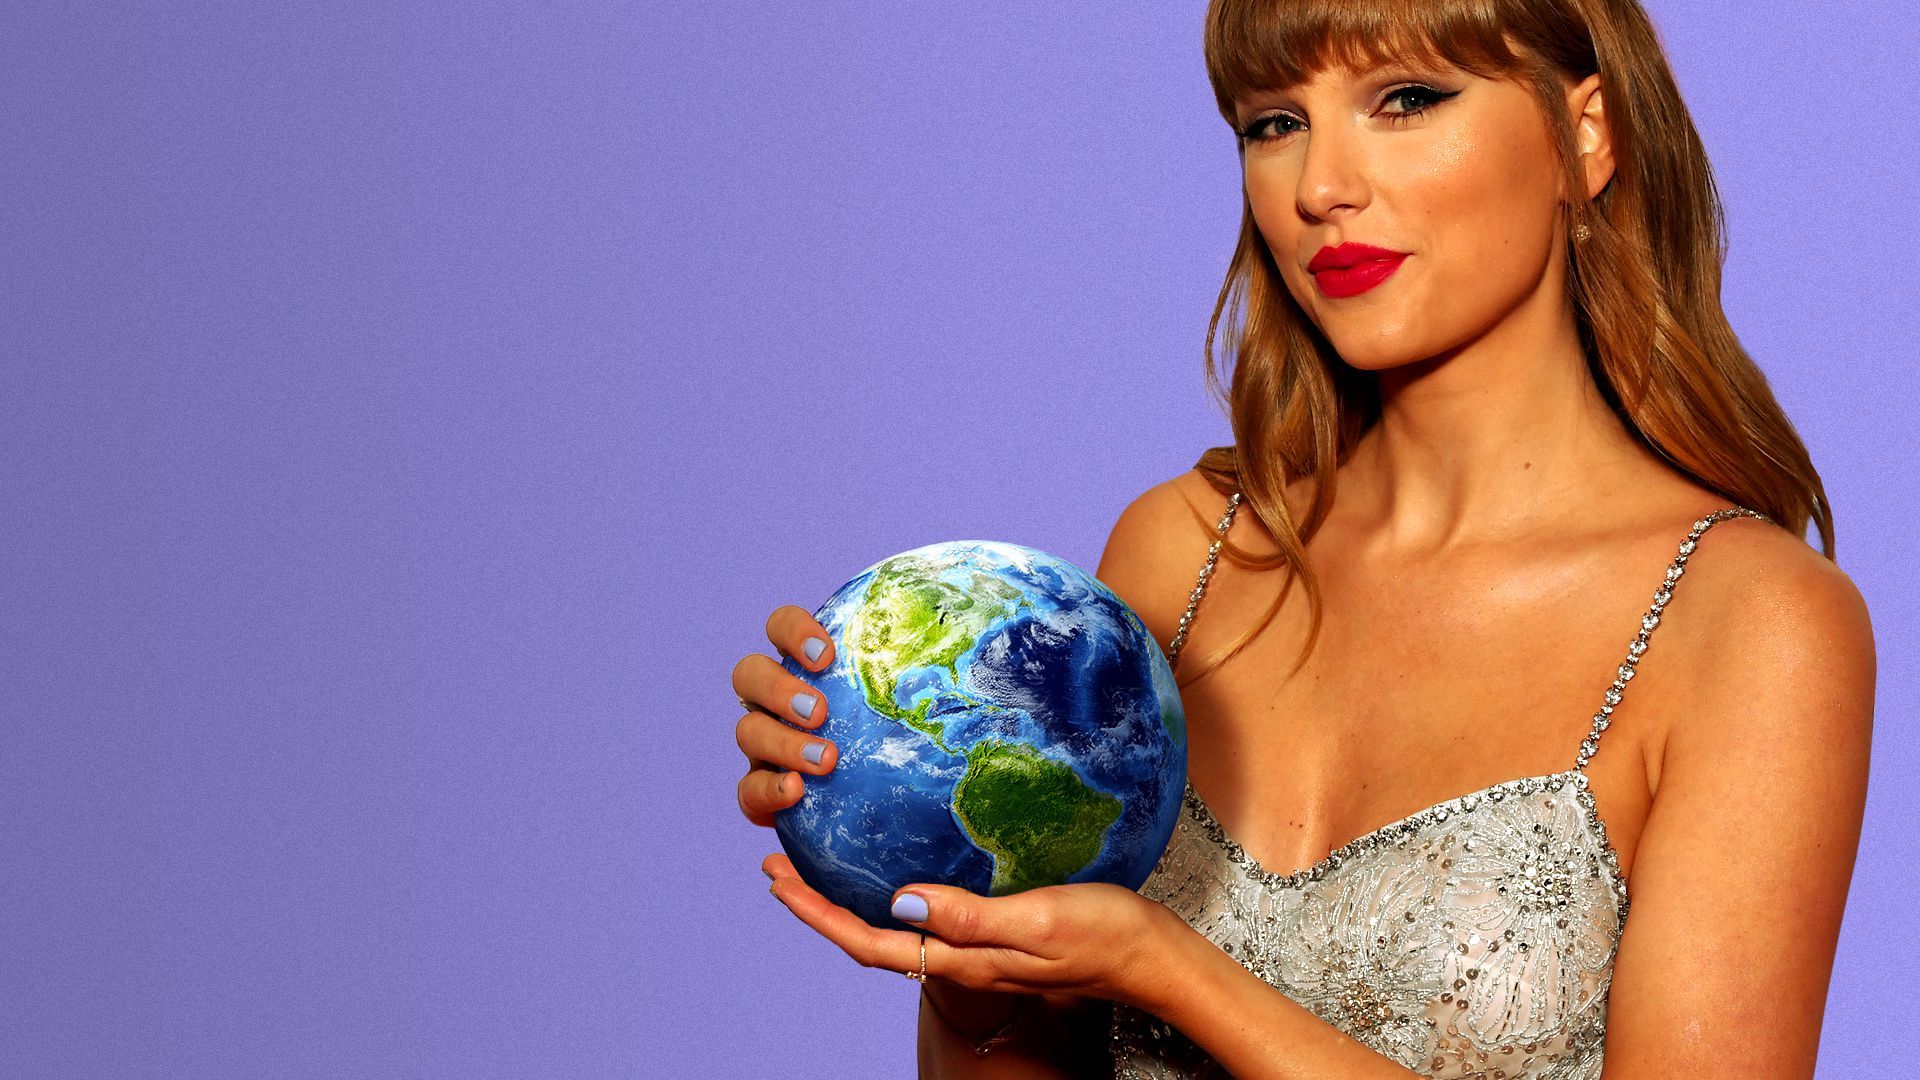 Photo illustration of Taylor Swift holding the Earth.